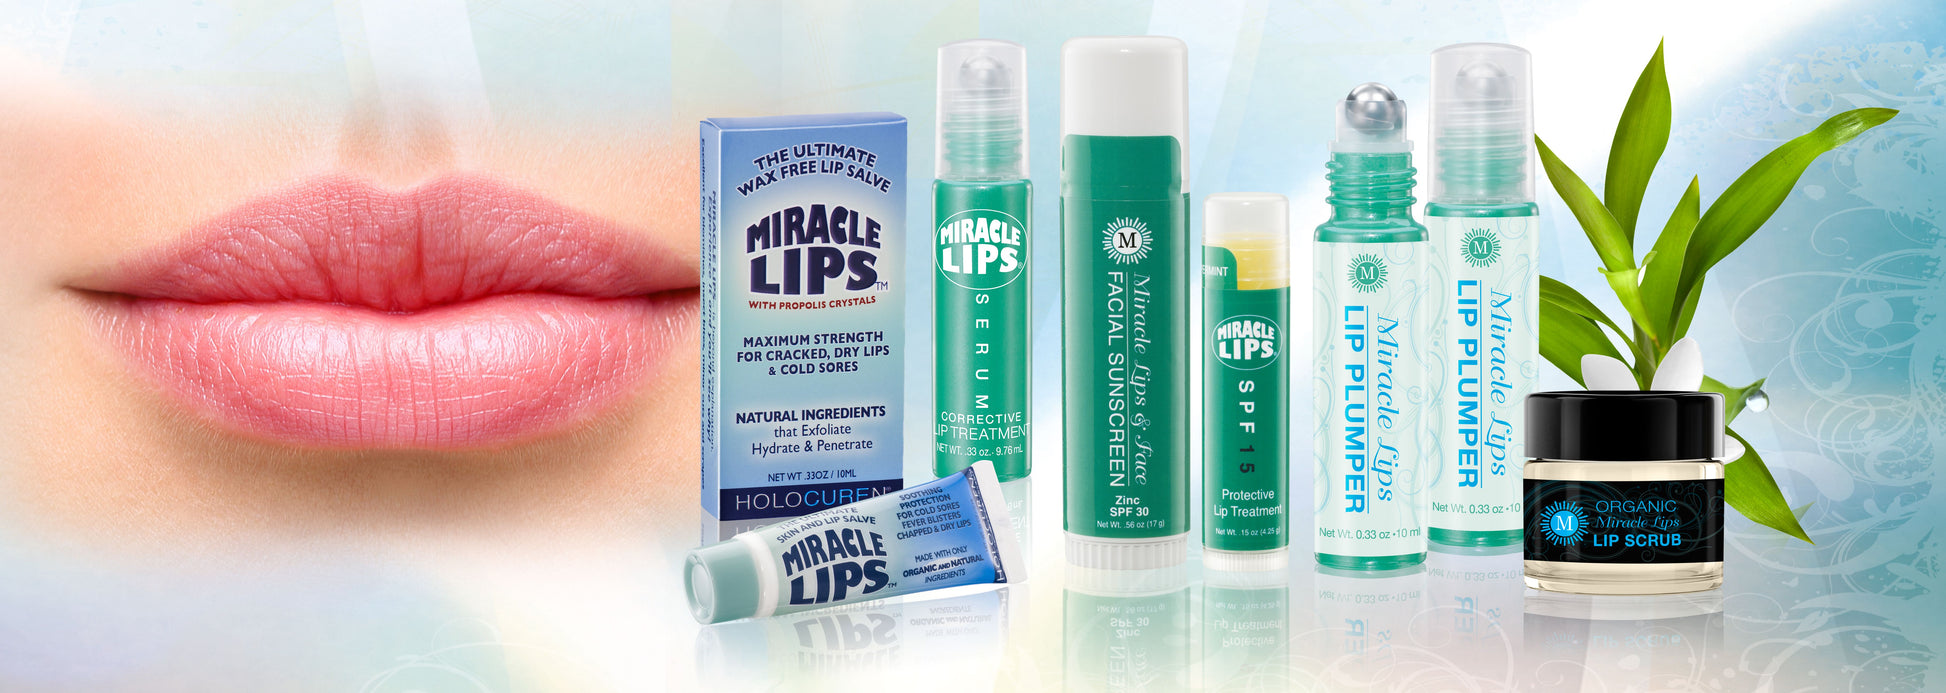 Miracle Lips Organic 2 in 1 Lip SCRUB and Moisture Balm - HOLOCUREN - Official Website